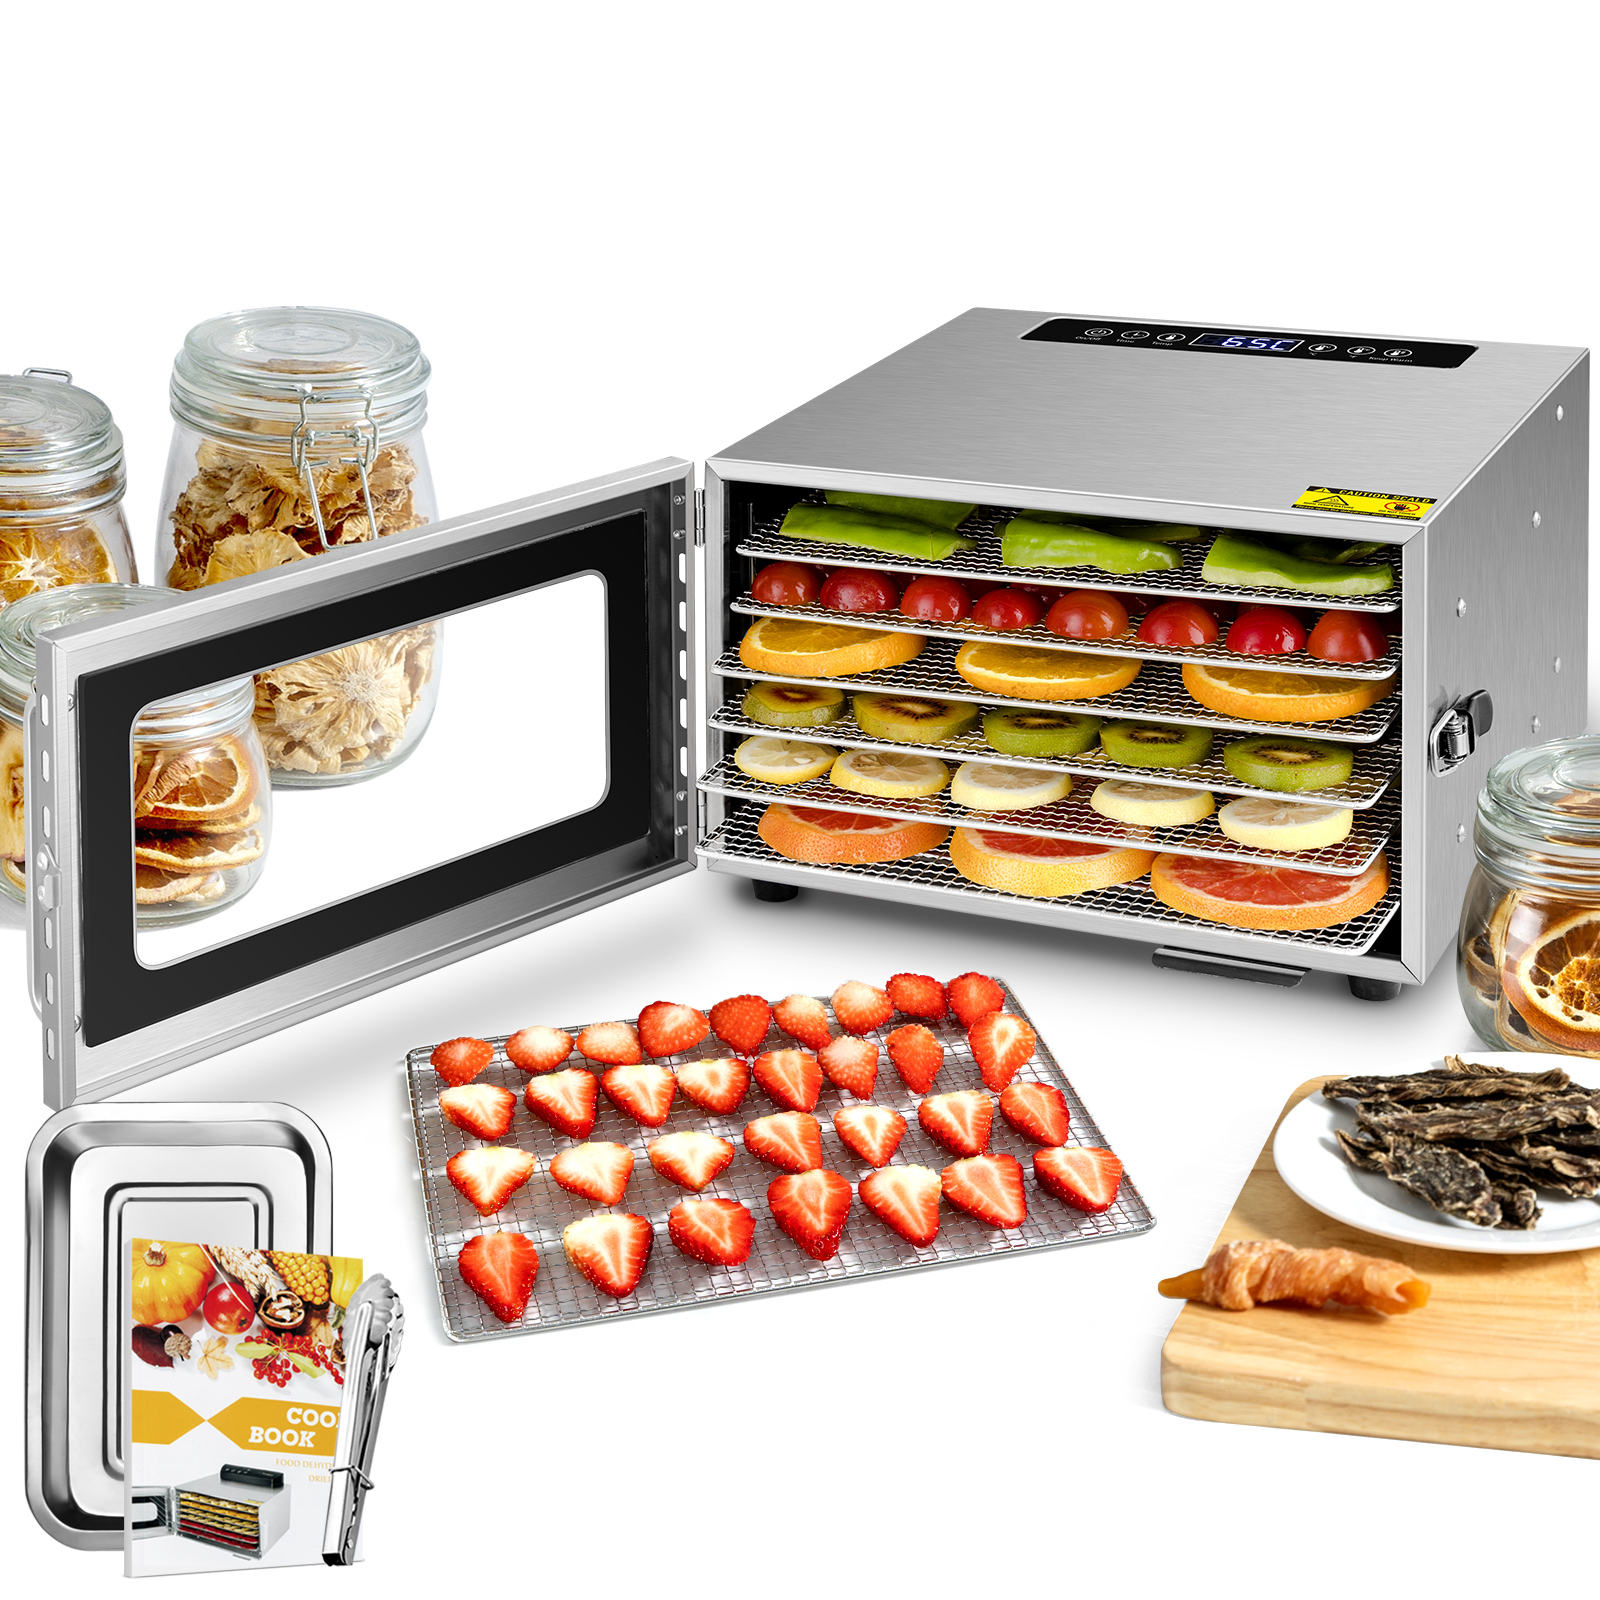 Kwasyo Stainless Steel Food Dehydrator, 6 Tray Fruit Dryer Machine with Free Recipe Book, BPA-Free, 30~90℃ Temperature Setting, Max 24h, Dehydrator Food Dryer UK for Vegetables, Meats, Chili-400W